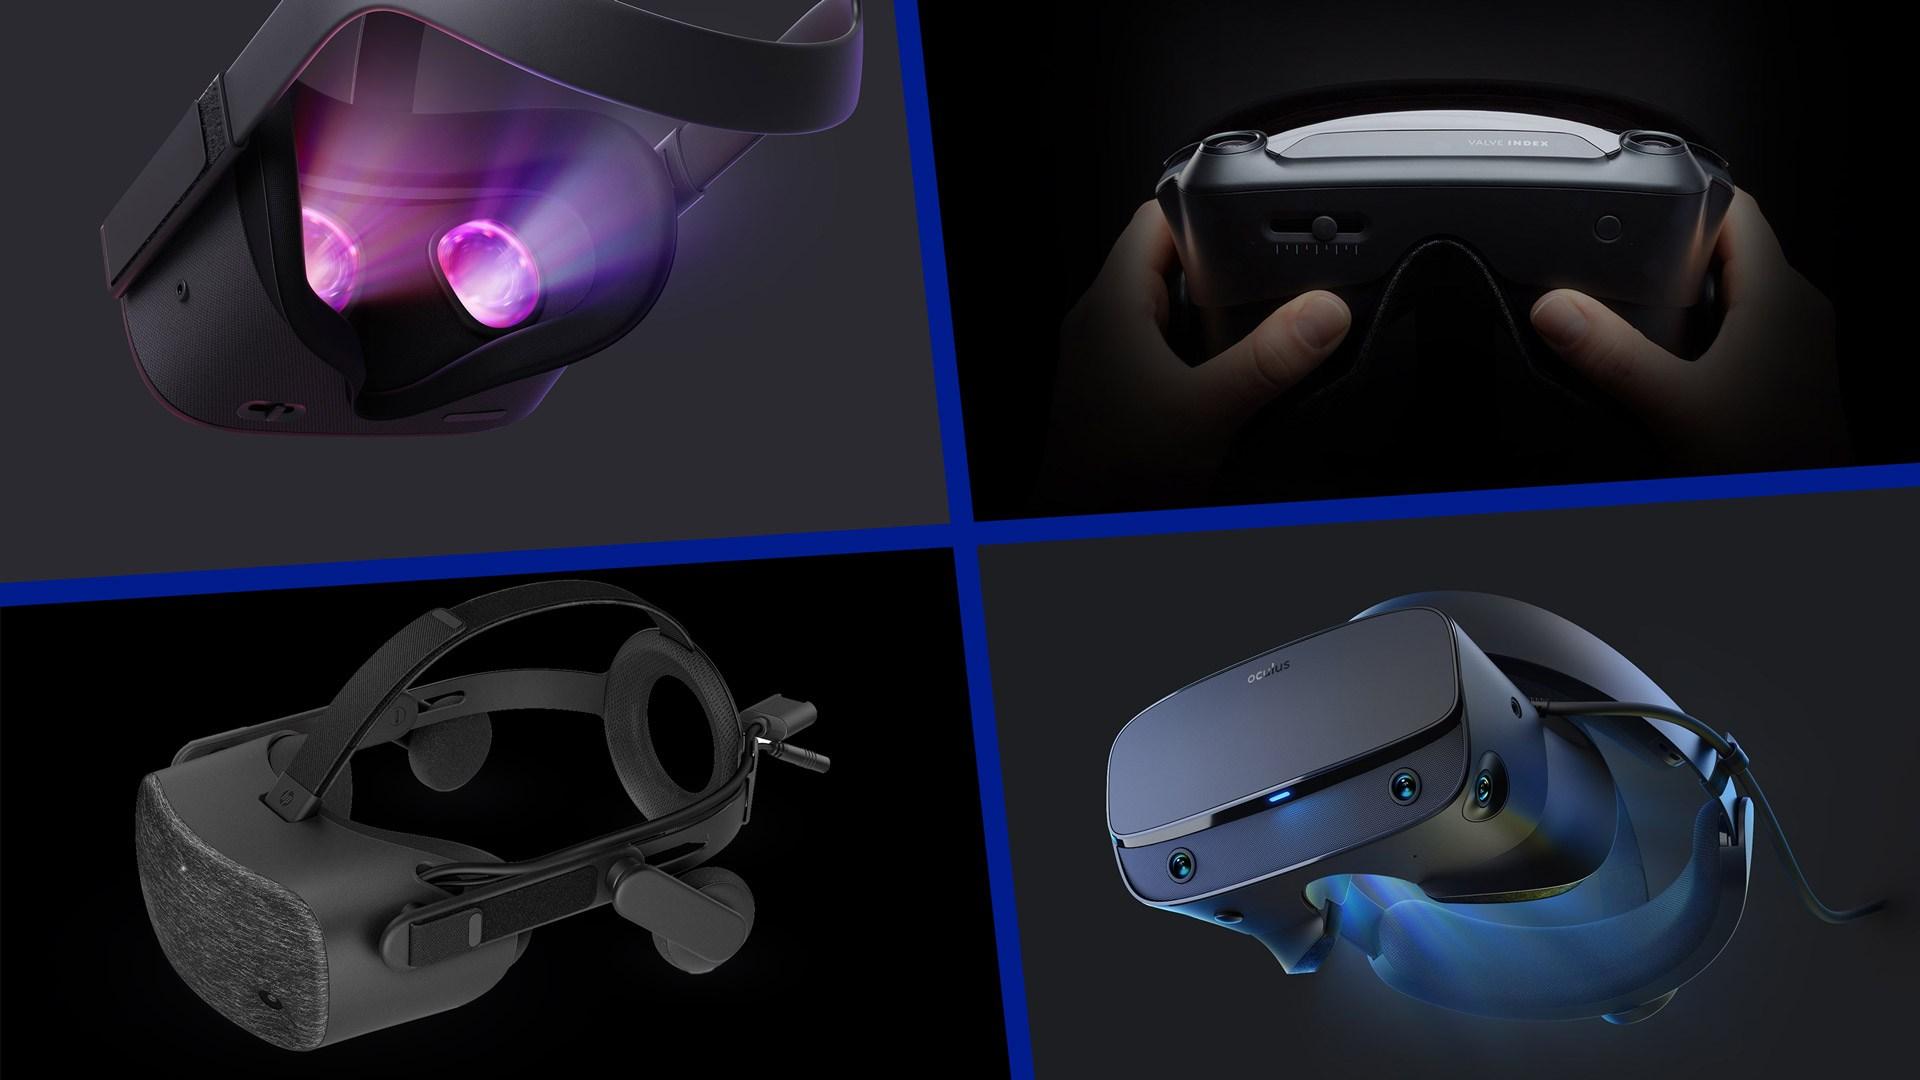 The Simple Guide to Oculus Quest, Rift S, HP Reverb, and Valve Index